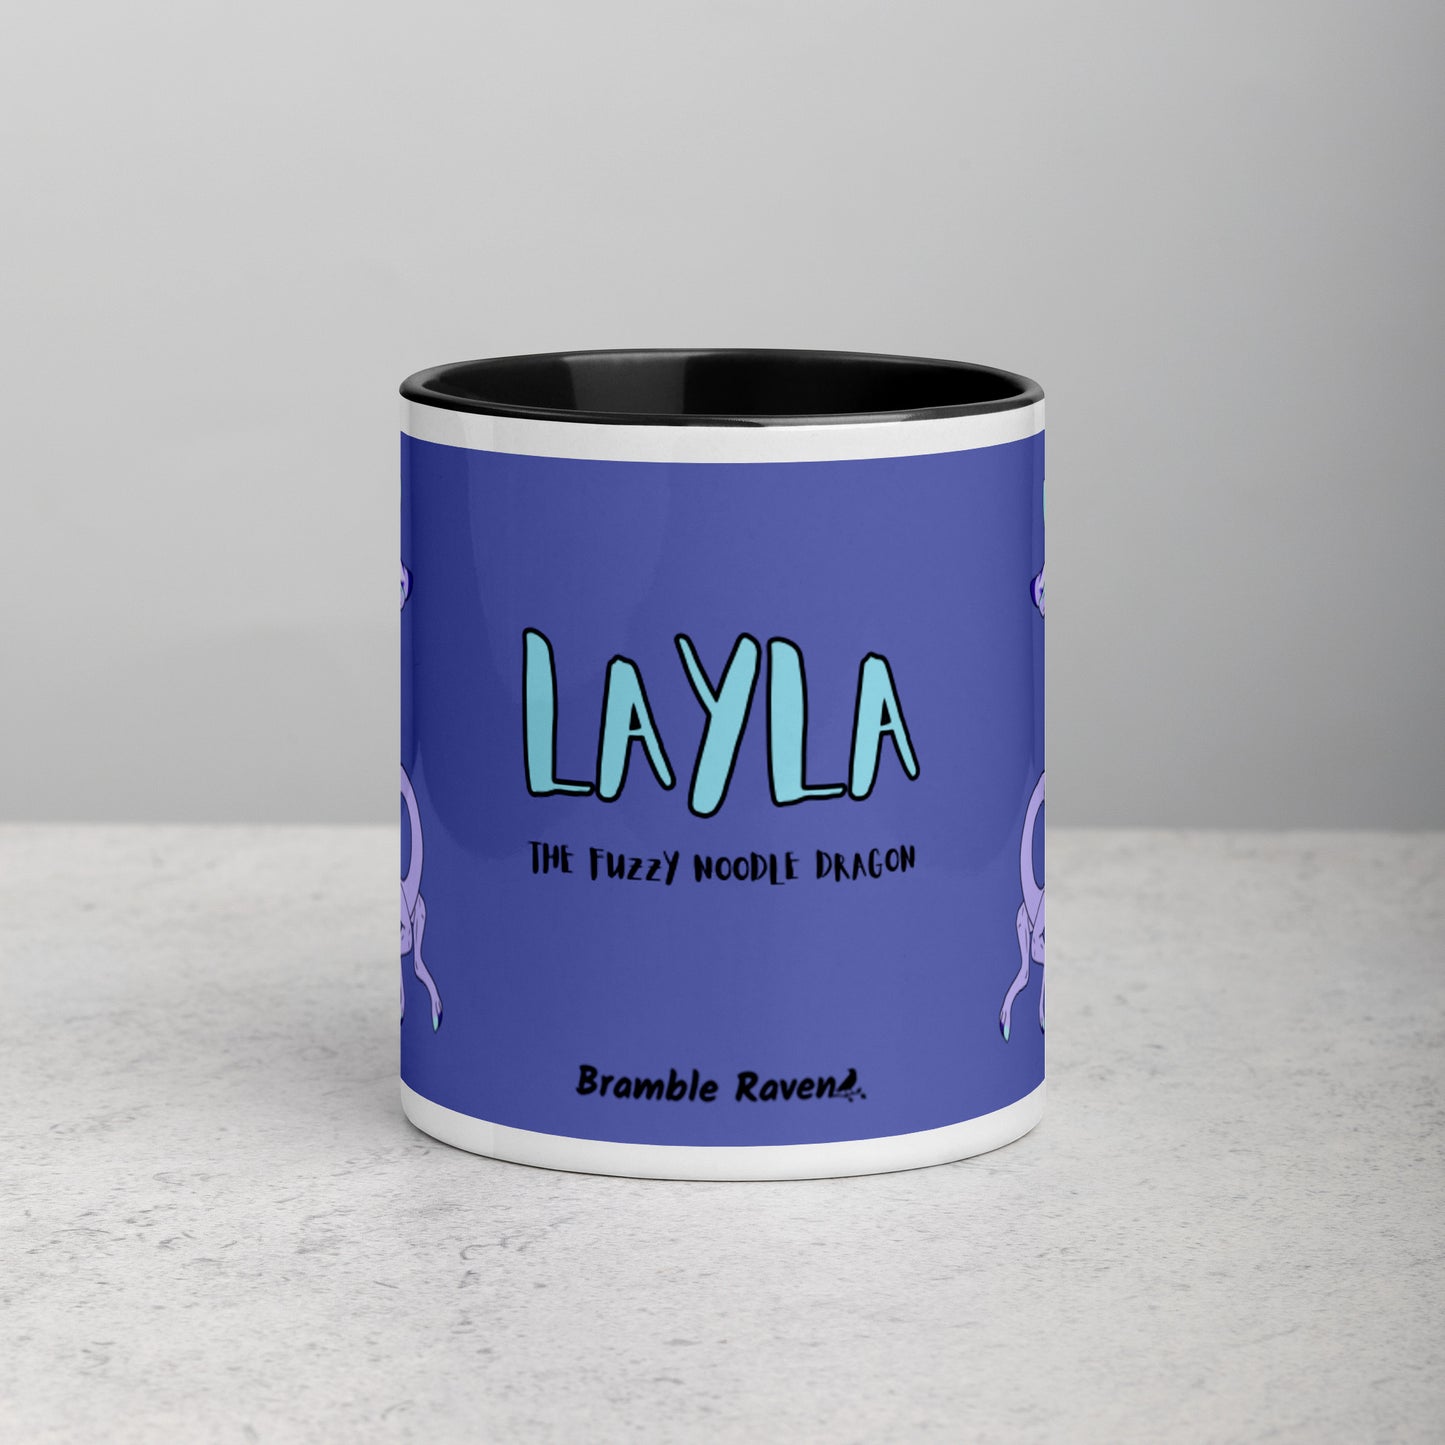 11 ounce white ceramic mug. Black inside and handle. Features double-sided image of Layla the Lavender Fuzzy Noodle Dragon. Shown on tabletop. Front view shows Layla the Fuzzy Noodle Dragon text and Bramble Raven logo.